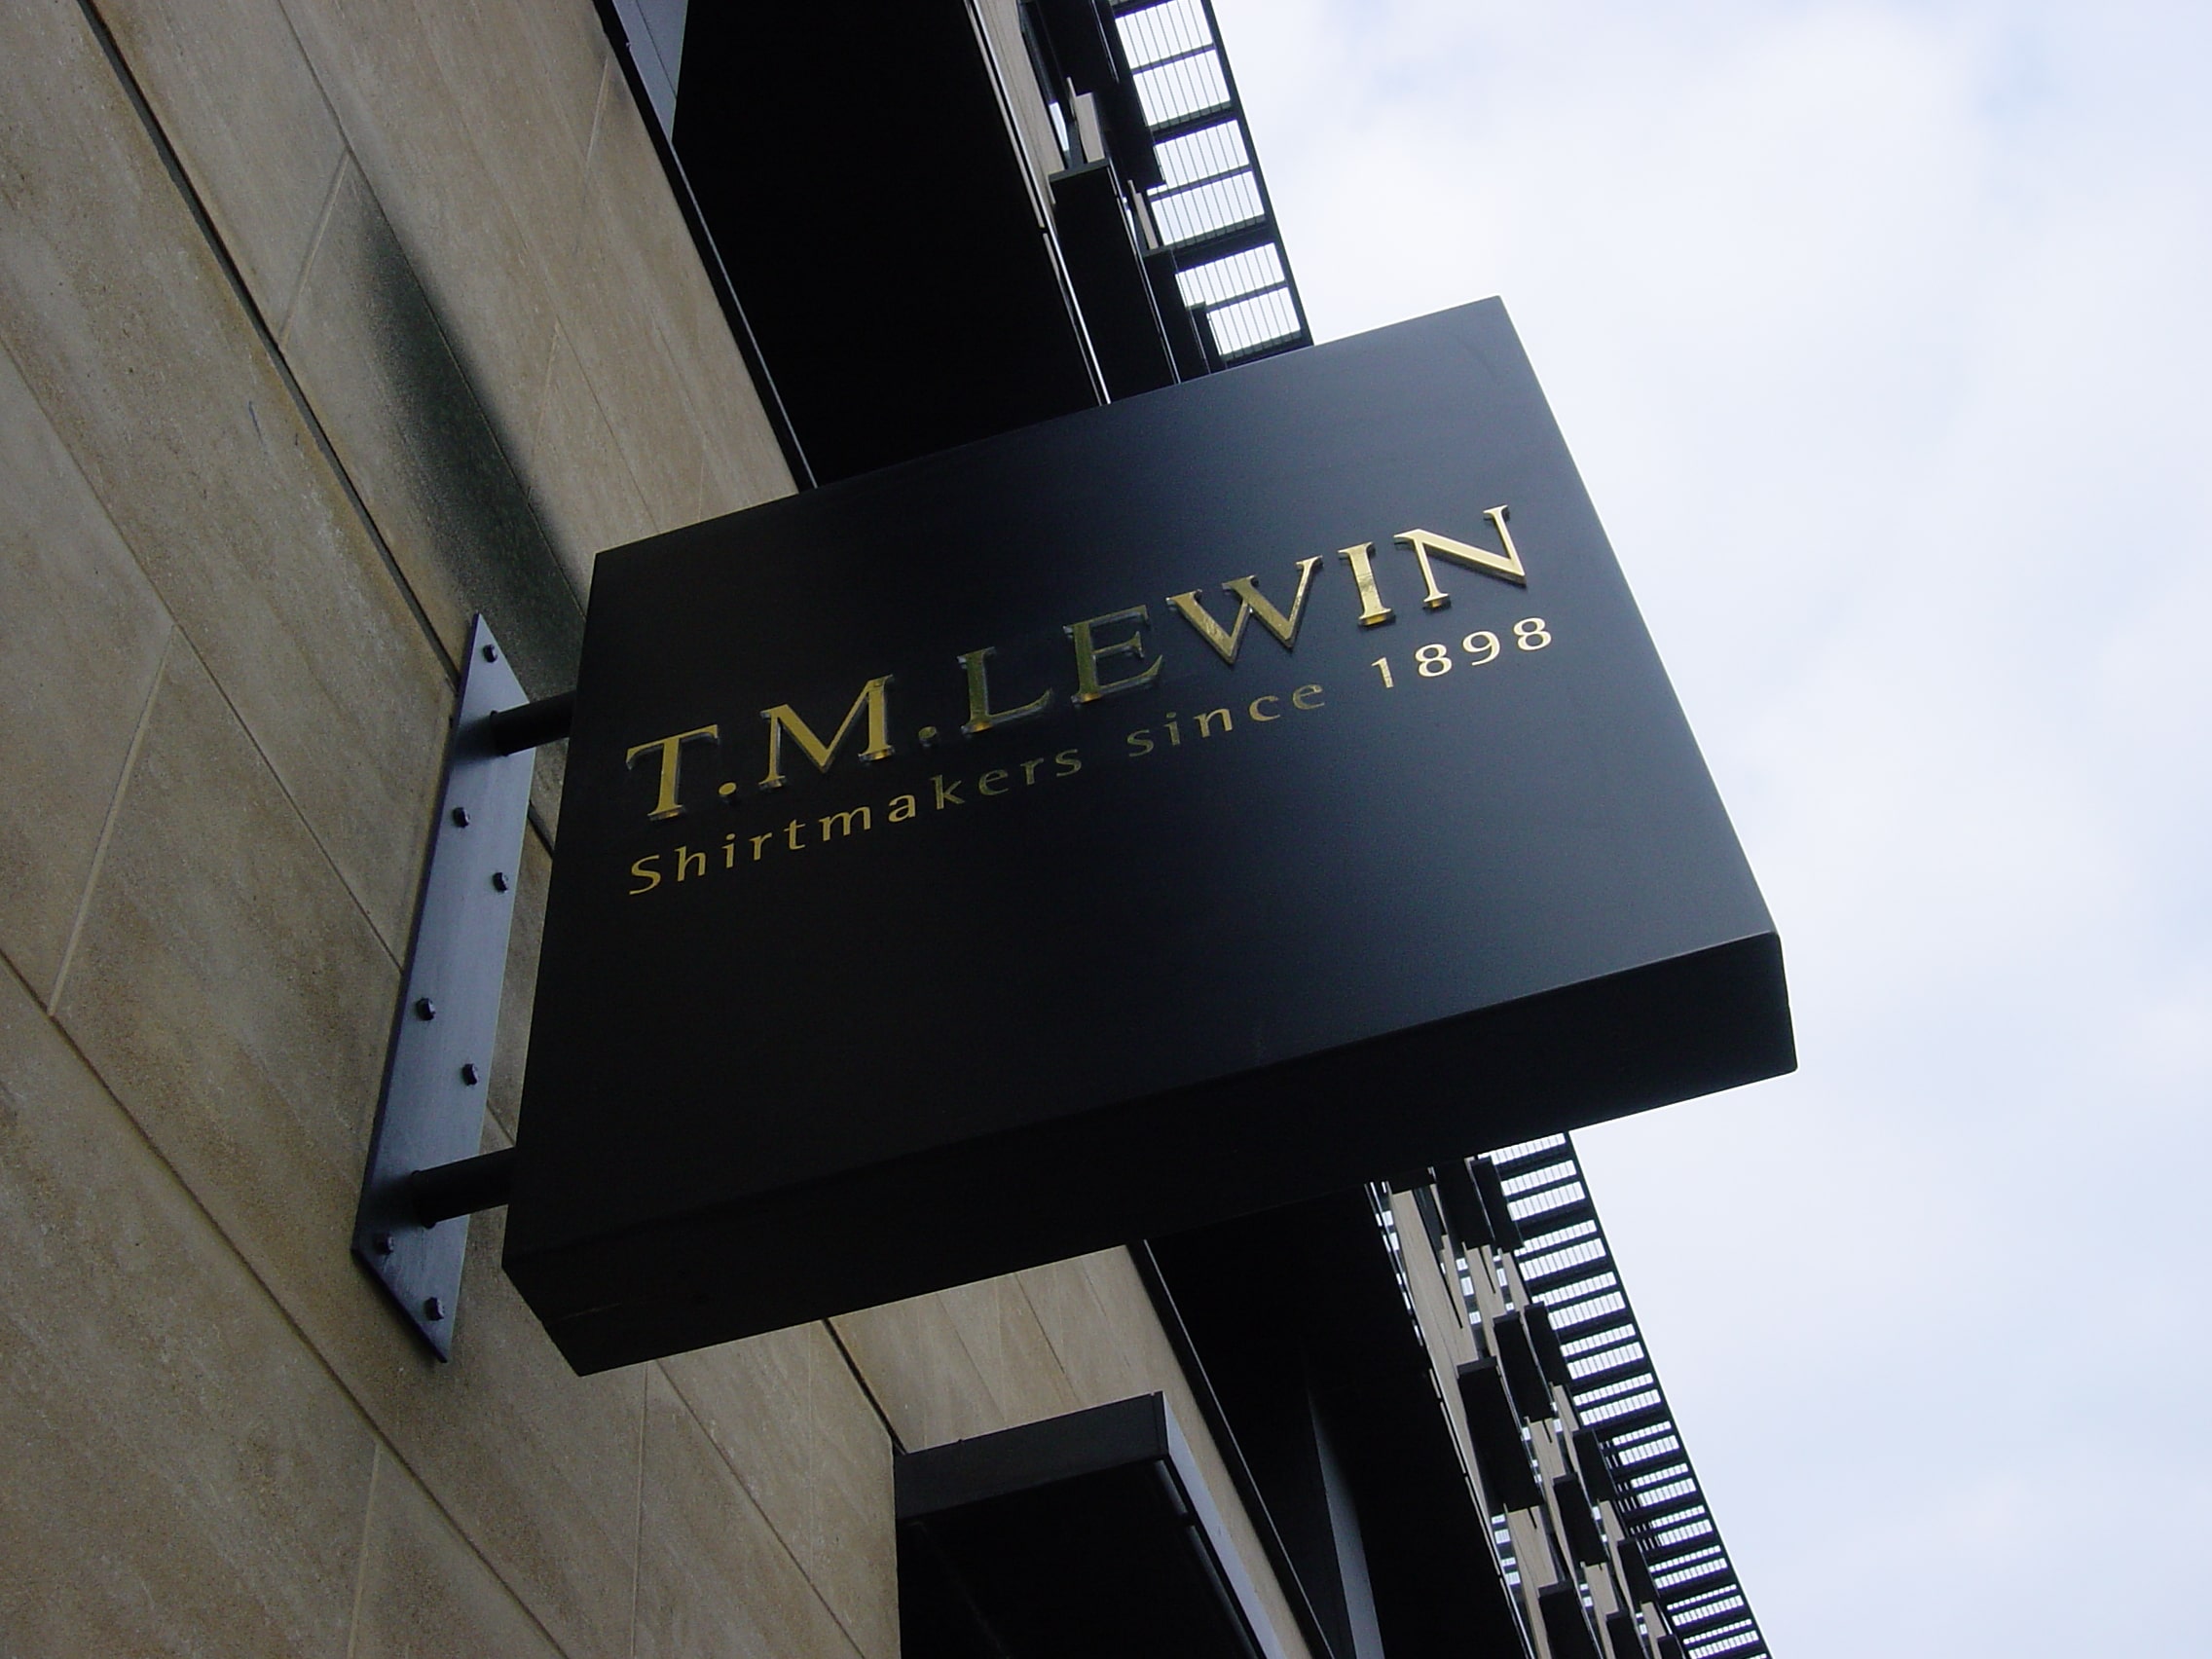 TMLEWIN projecting sign